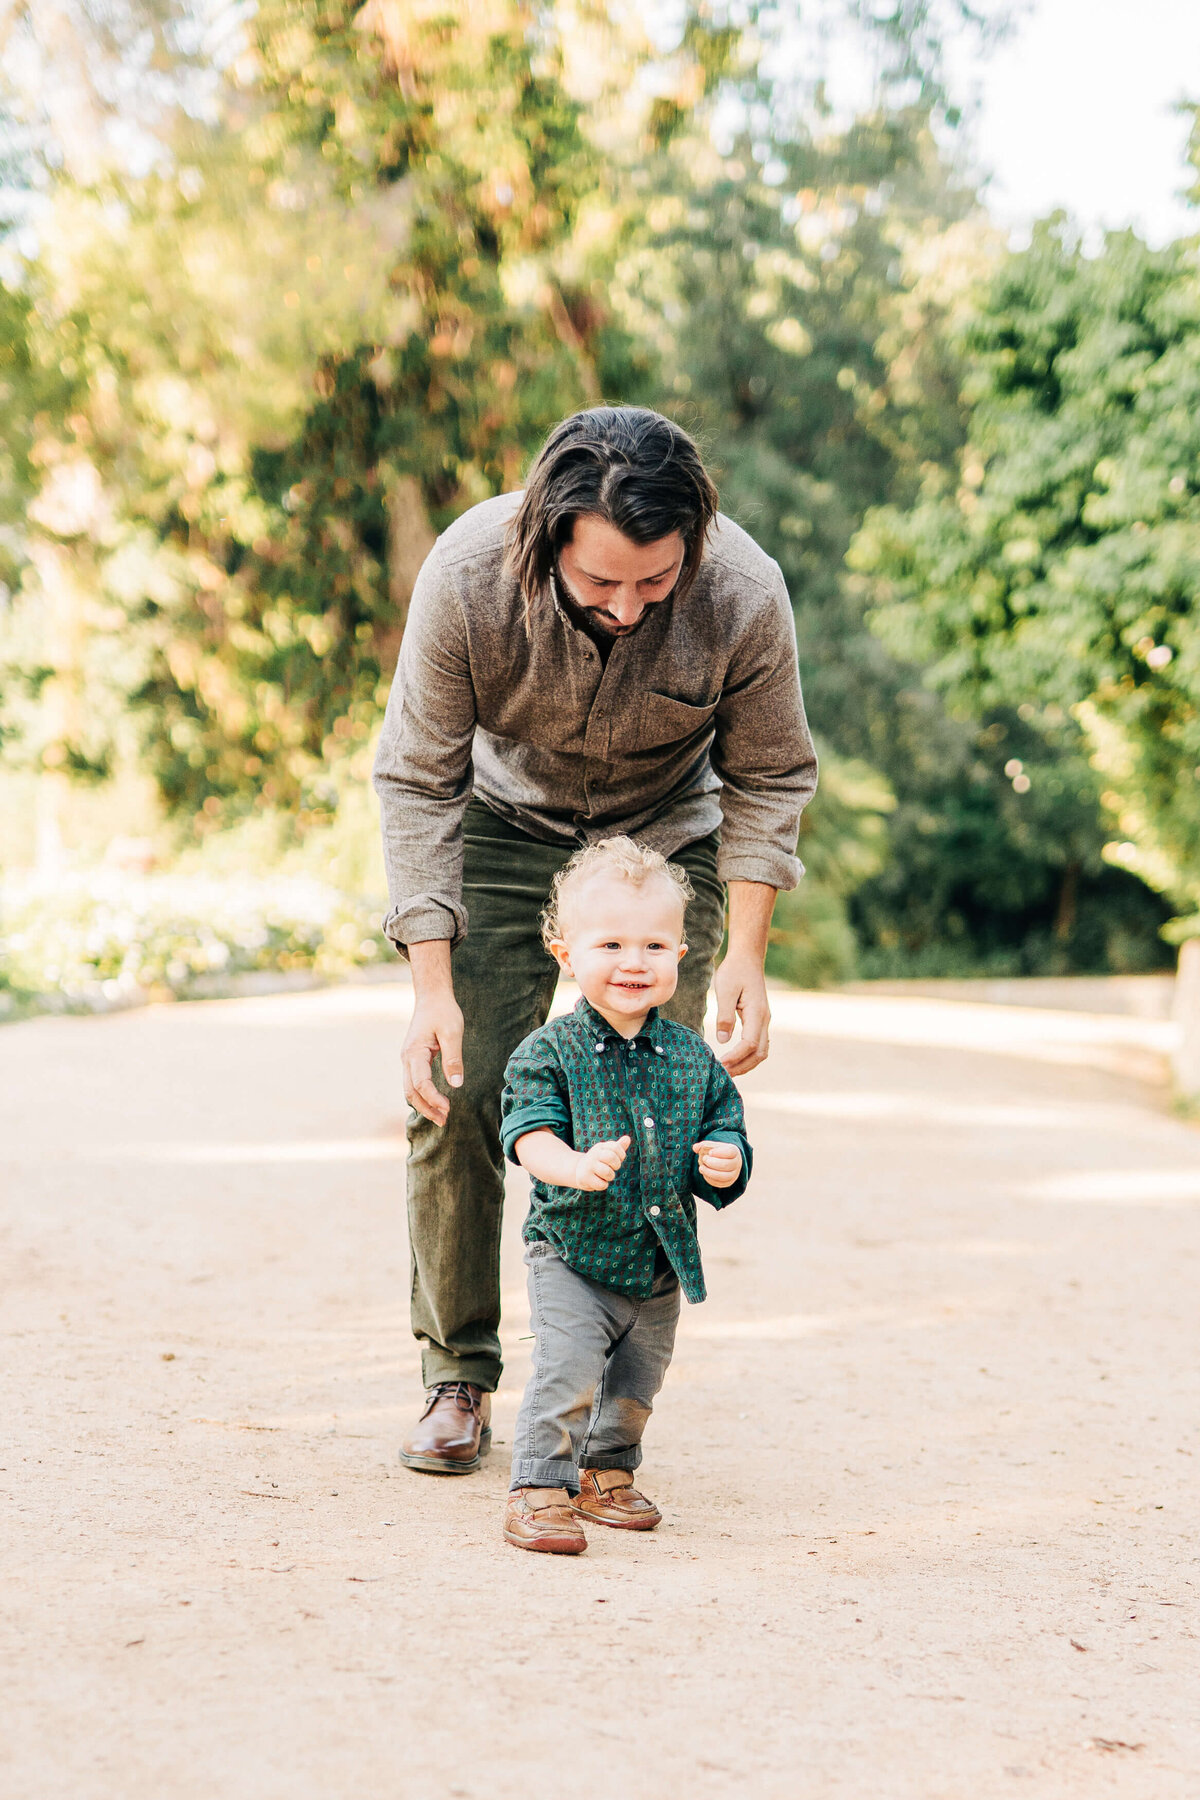 Dad plays and chases baby to keep him happy for family photos in Los Angeles